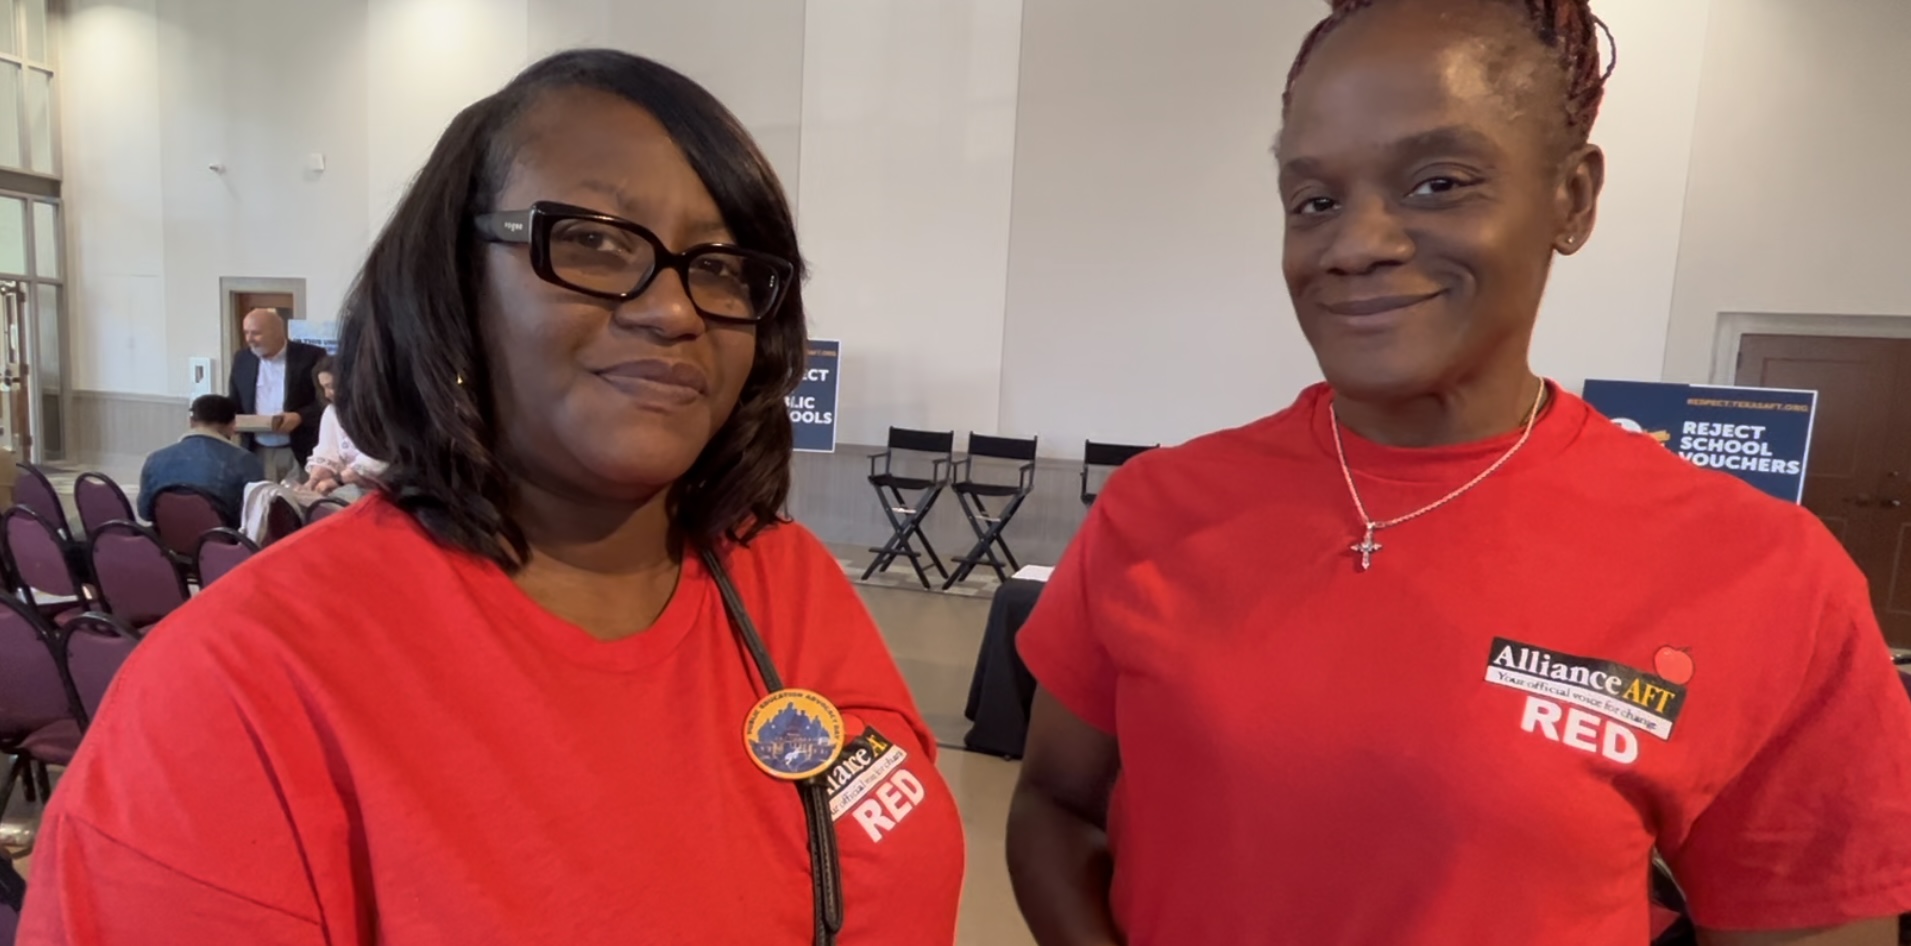 Two Black women pose for the camera in red tees which read "Alliance AFT Red".